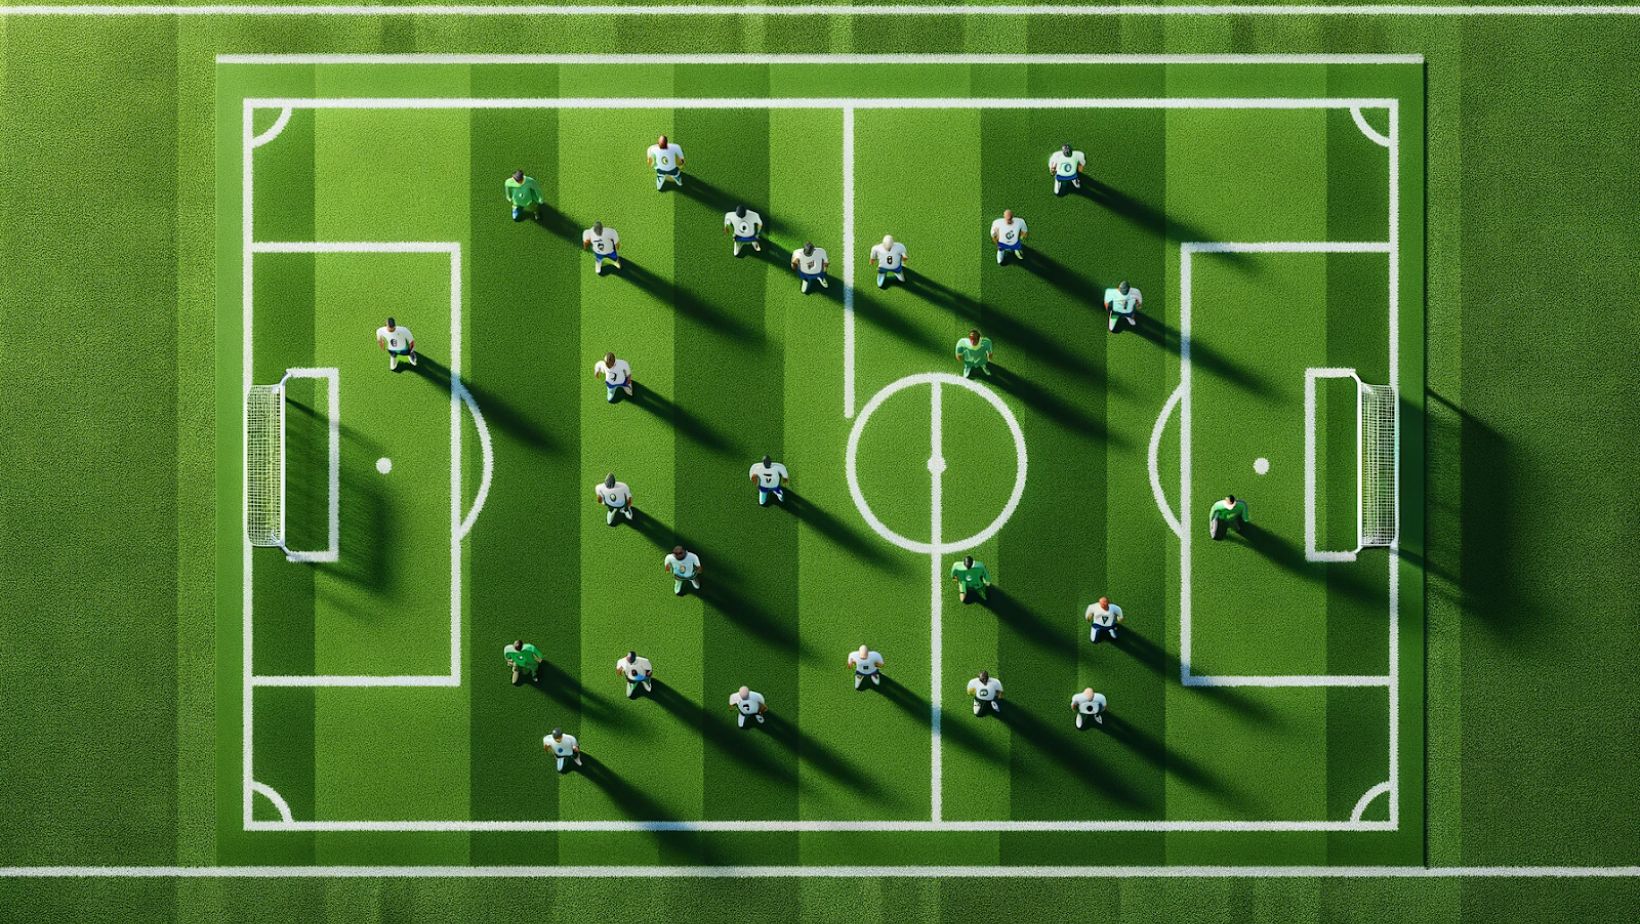 Changes in Football Formations Over the Decades